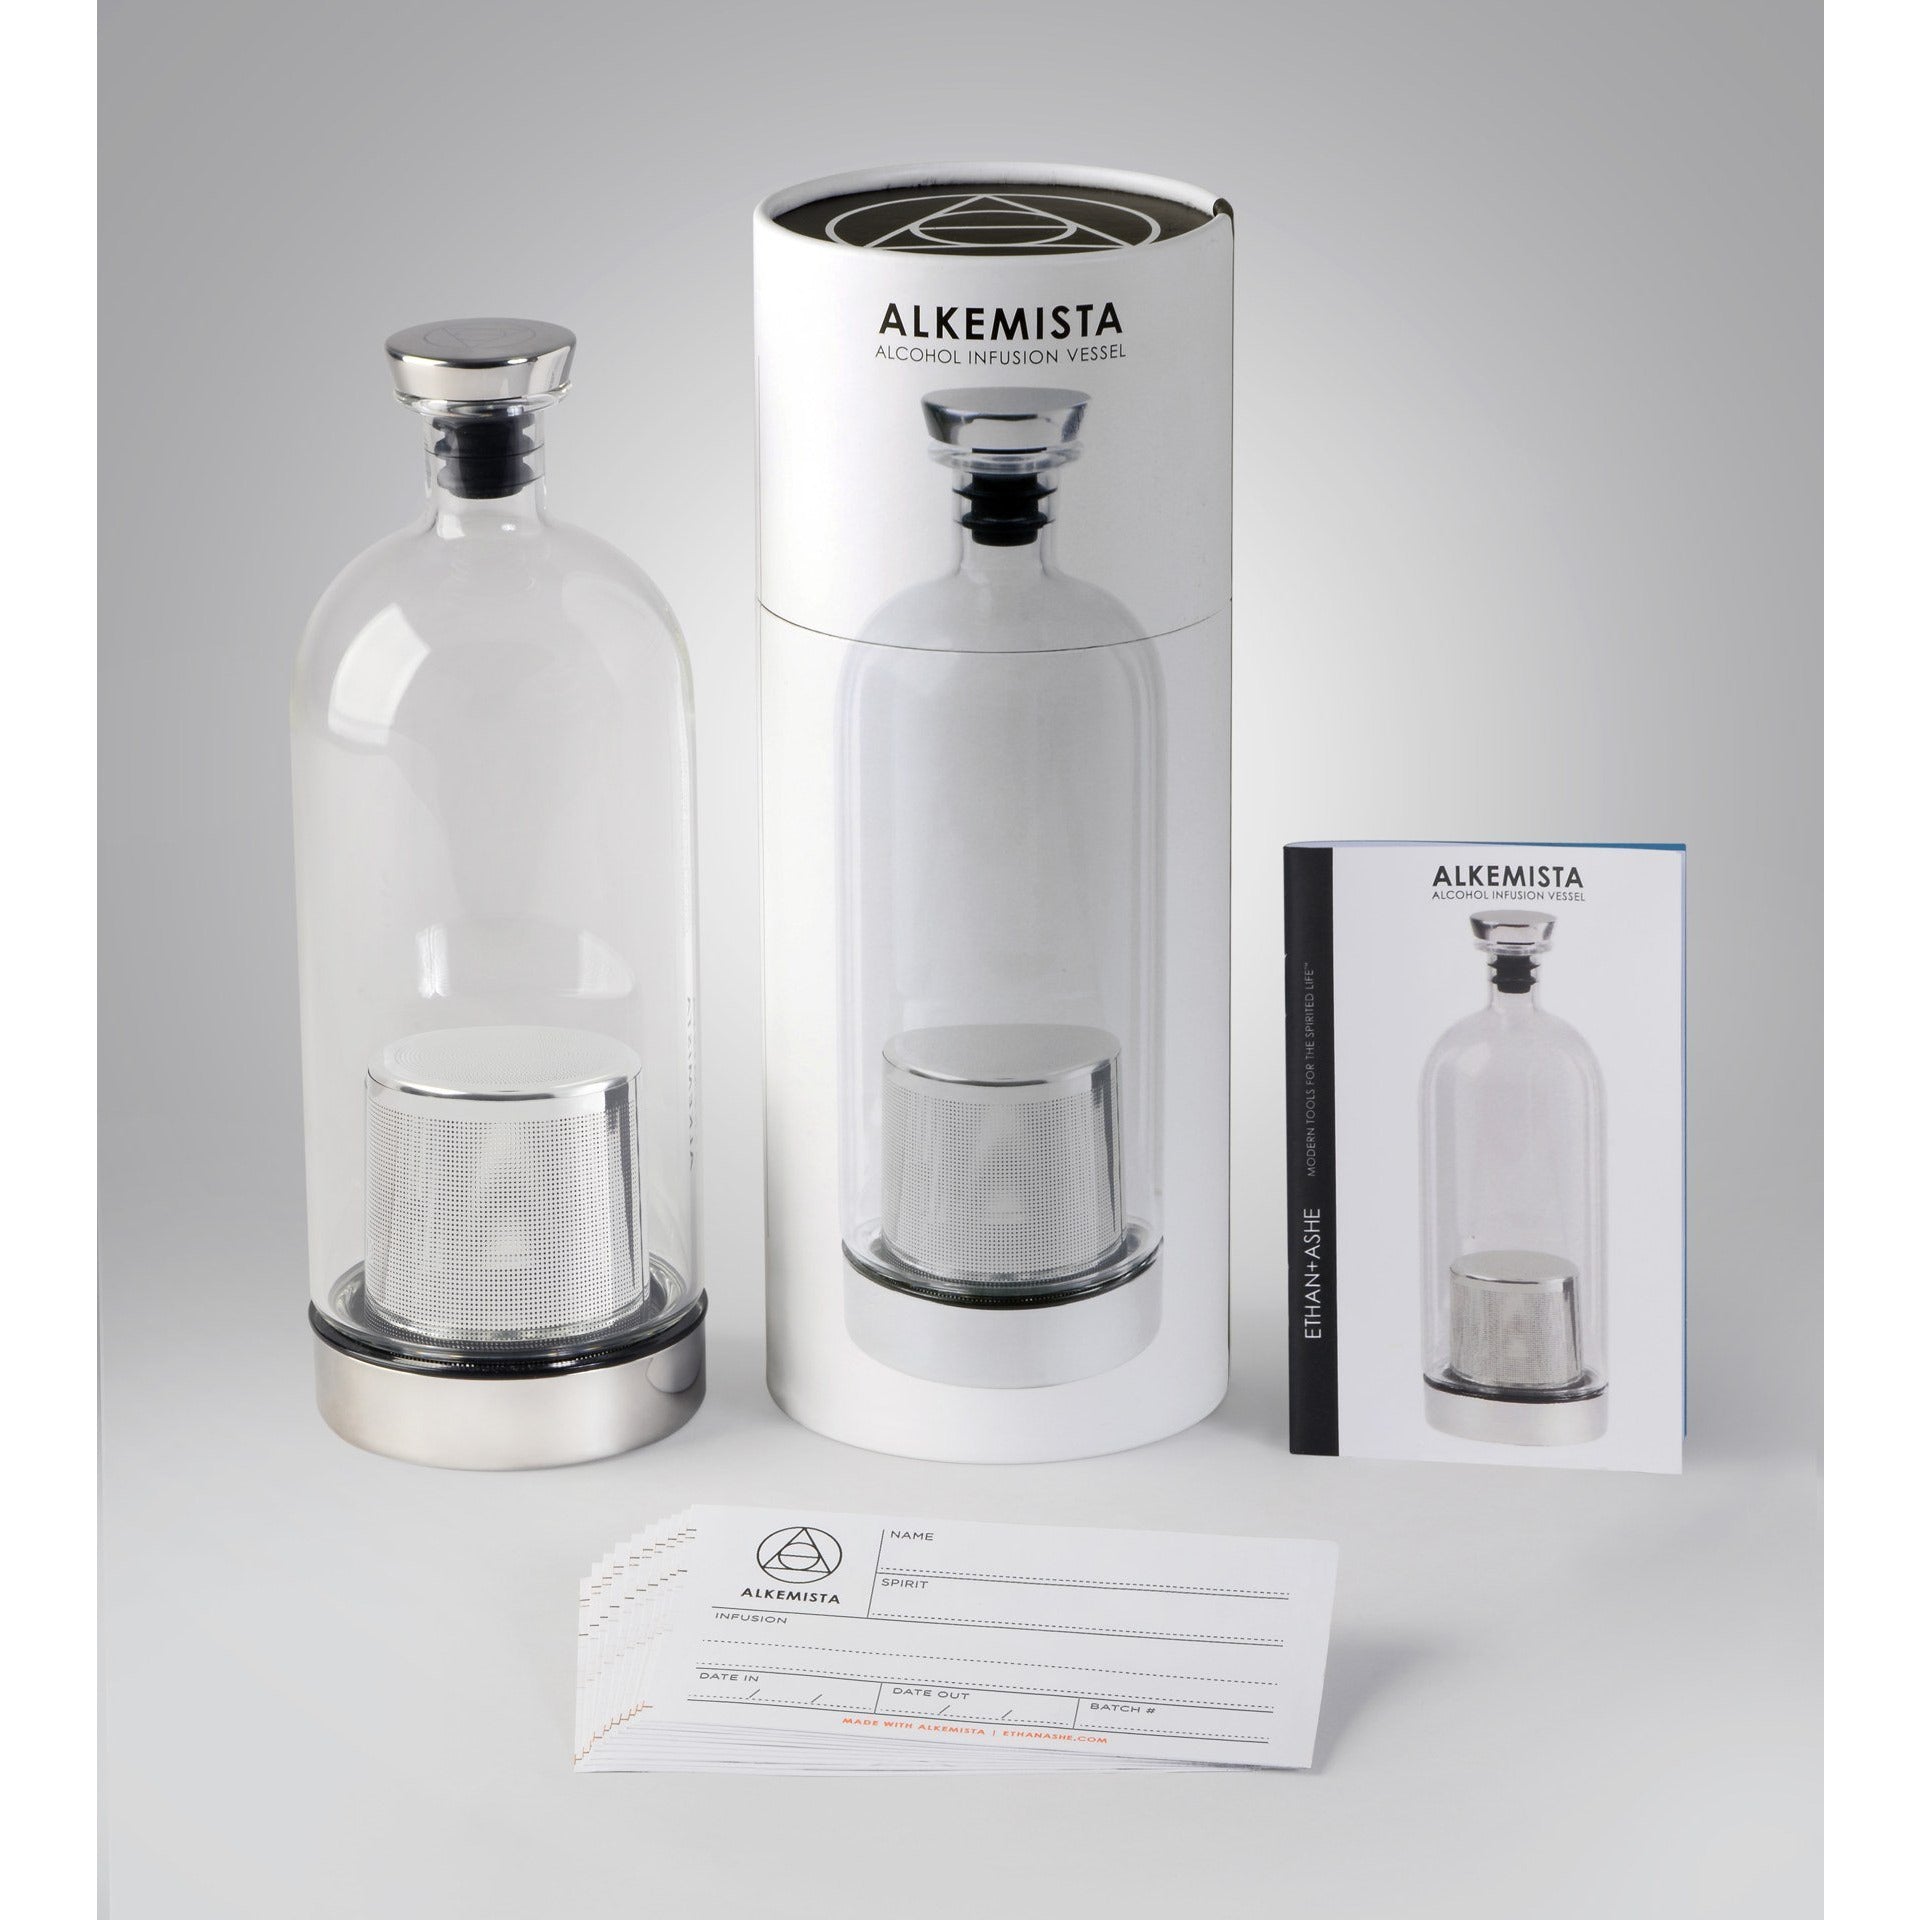 Alkemista Alcohol Infussion Kit that lets you infuse alcohol with your favorite flavors